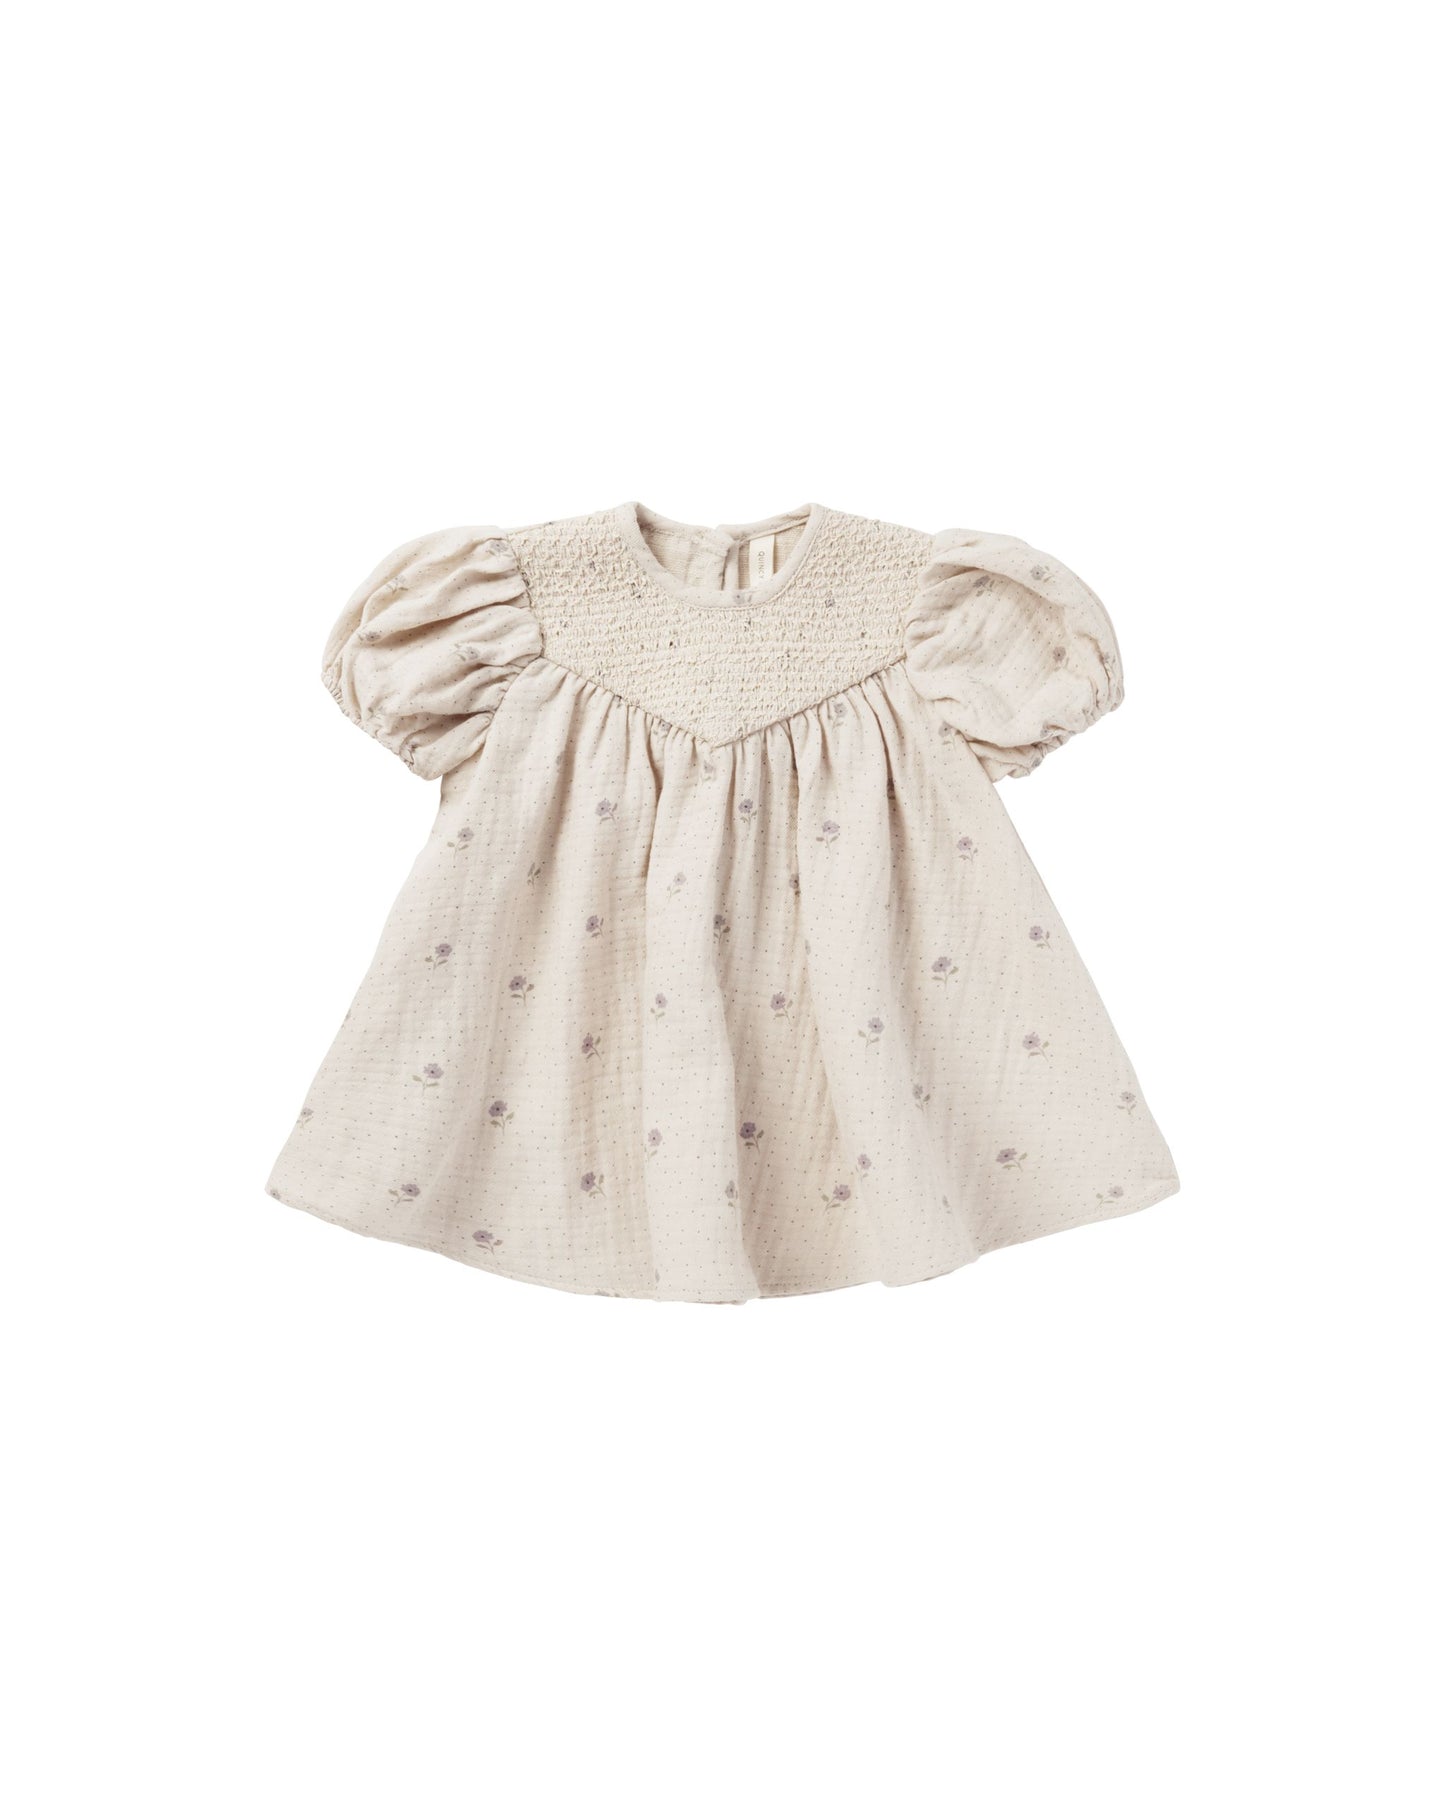 Quincy Mae Smocked Carina Dress in Sweet Pea